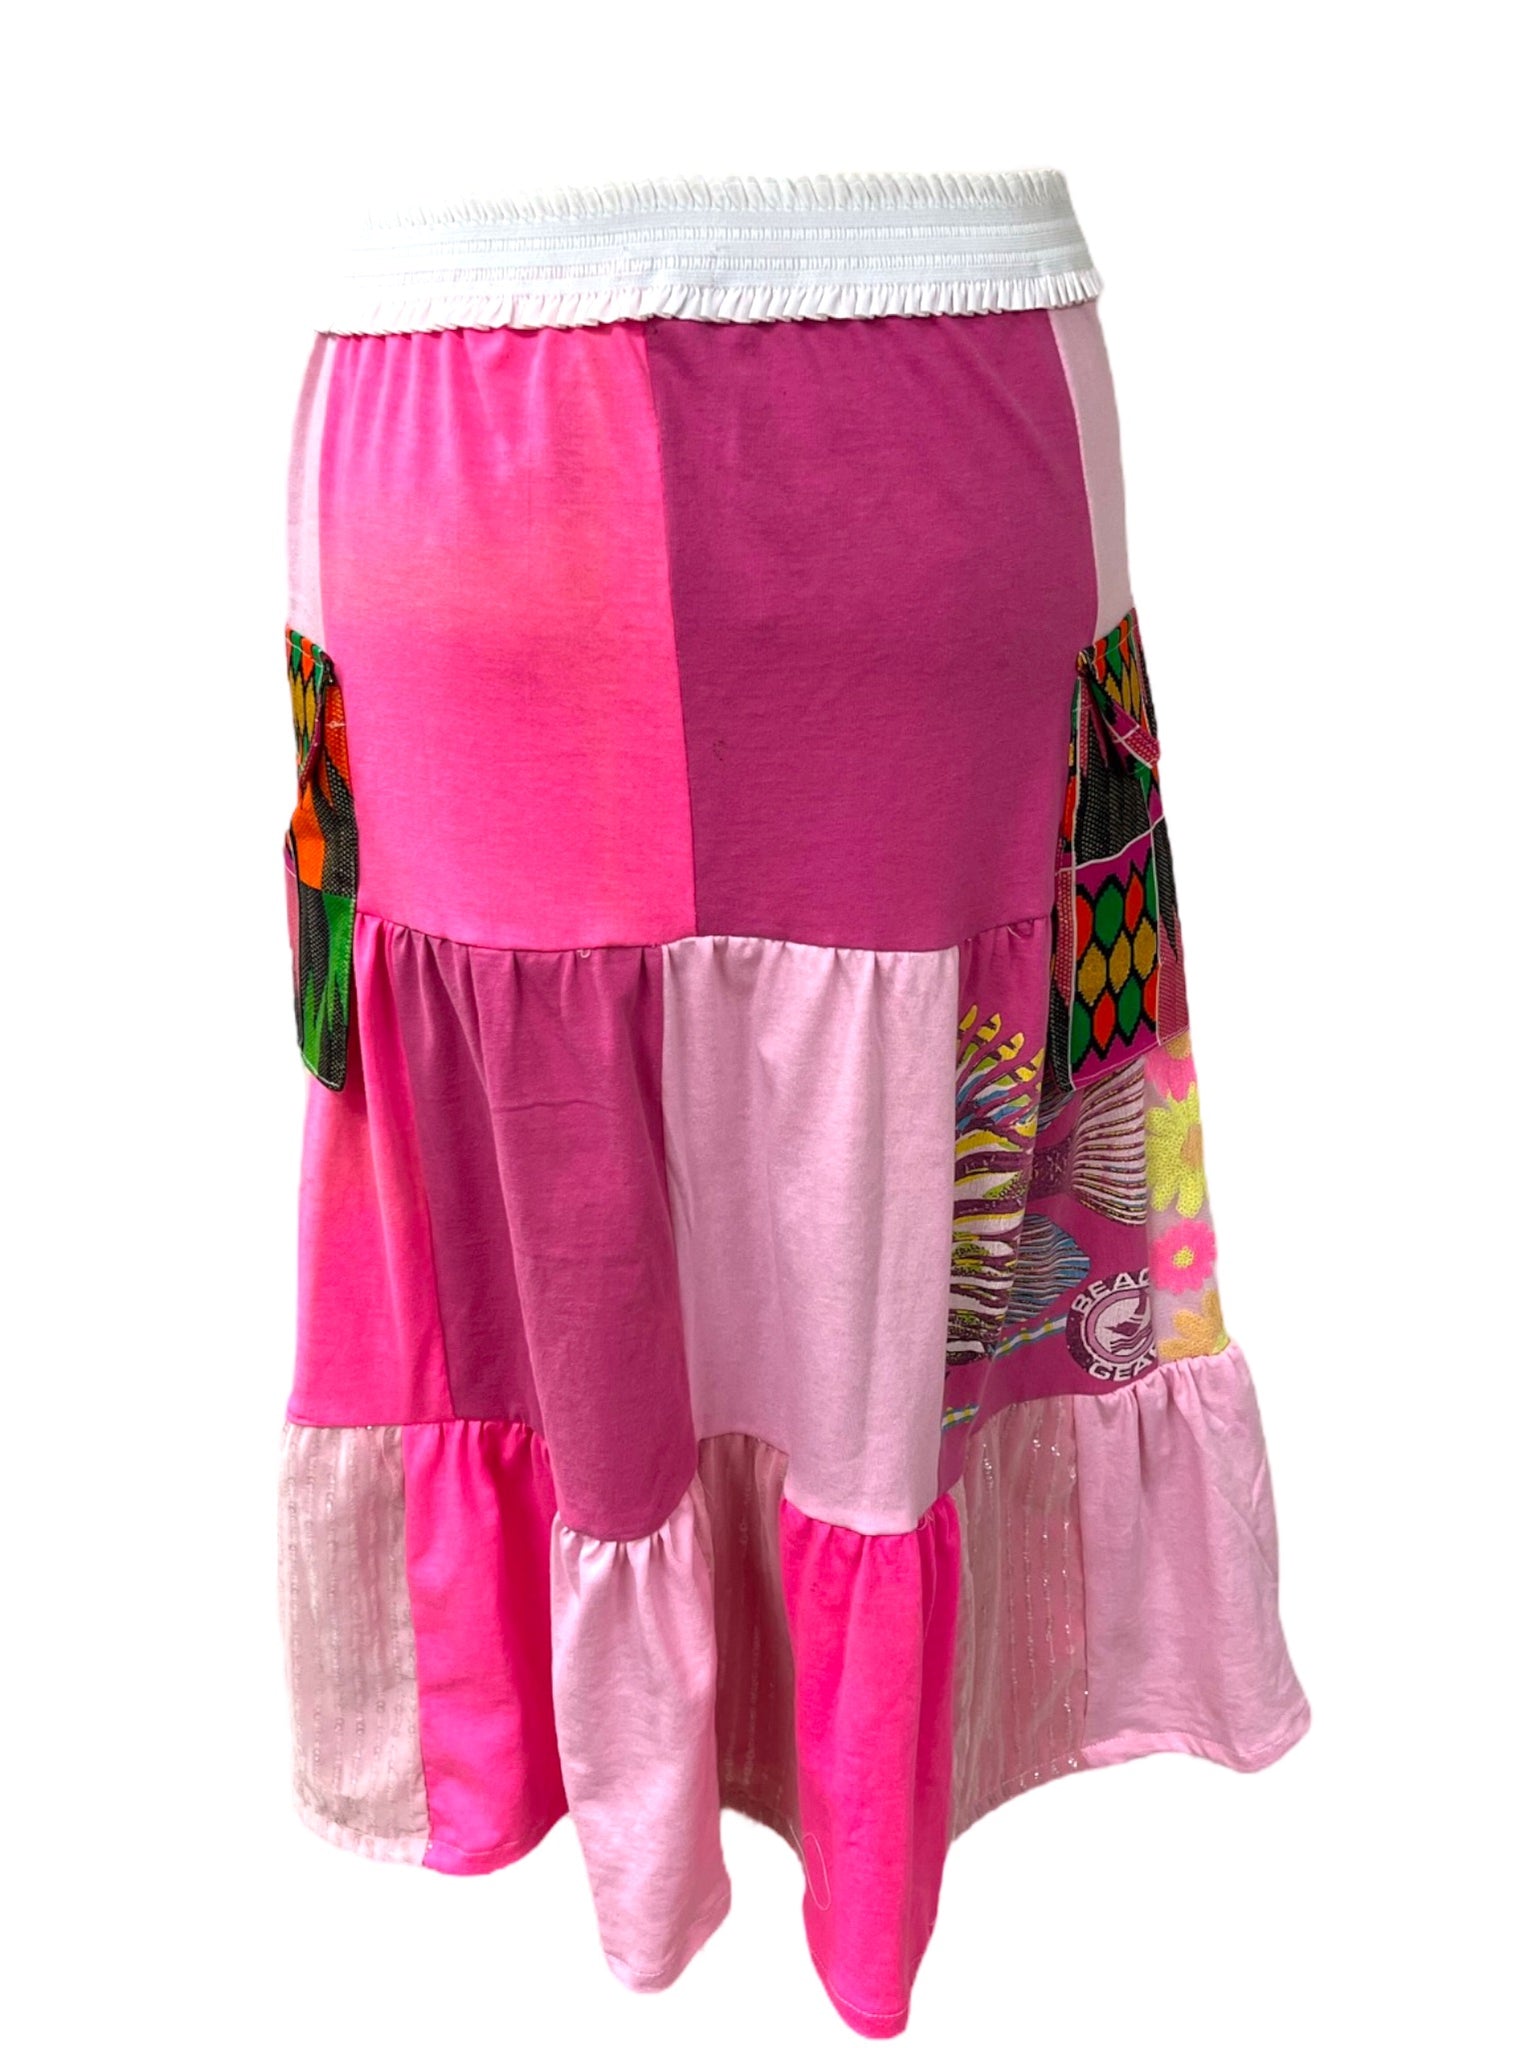 "Pretty in Pink" Daisy Skirt